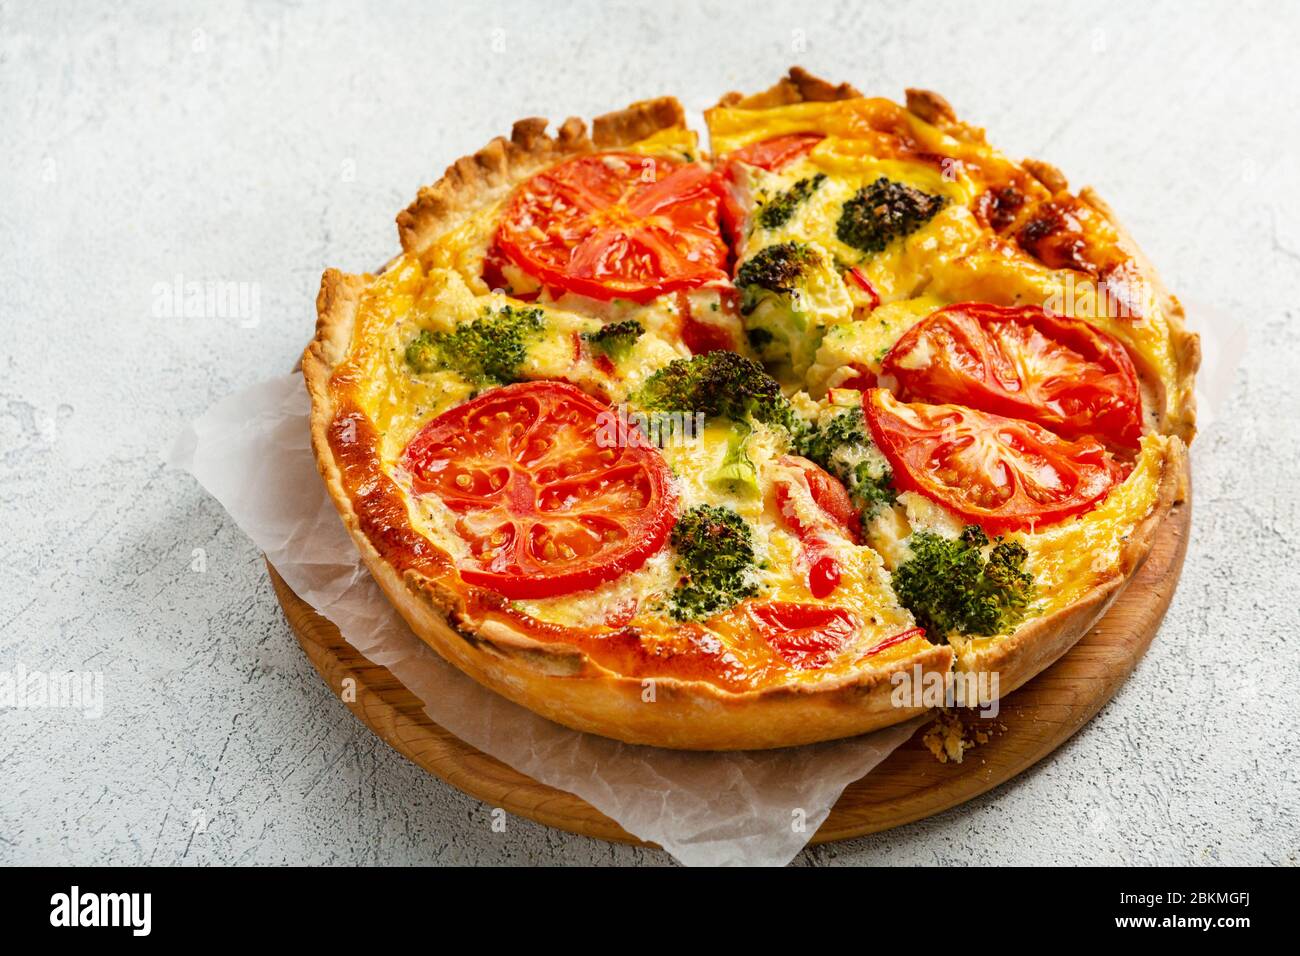 Quiche lorraine with broccoli and cheese on  cutting board, food close up Stock Photo